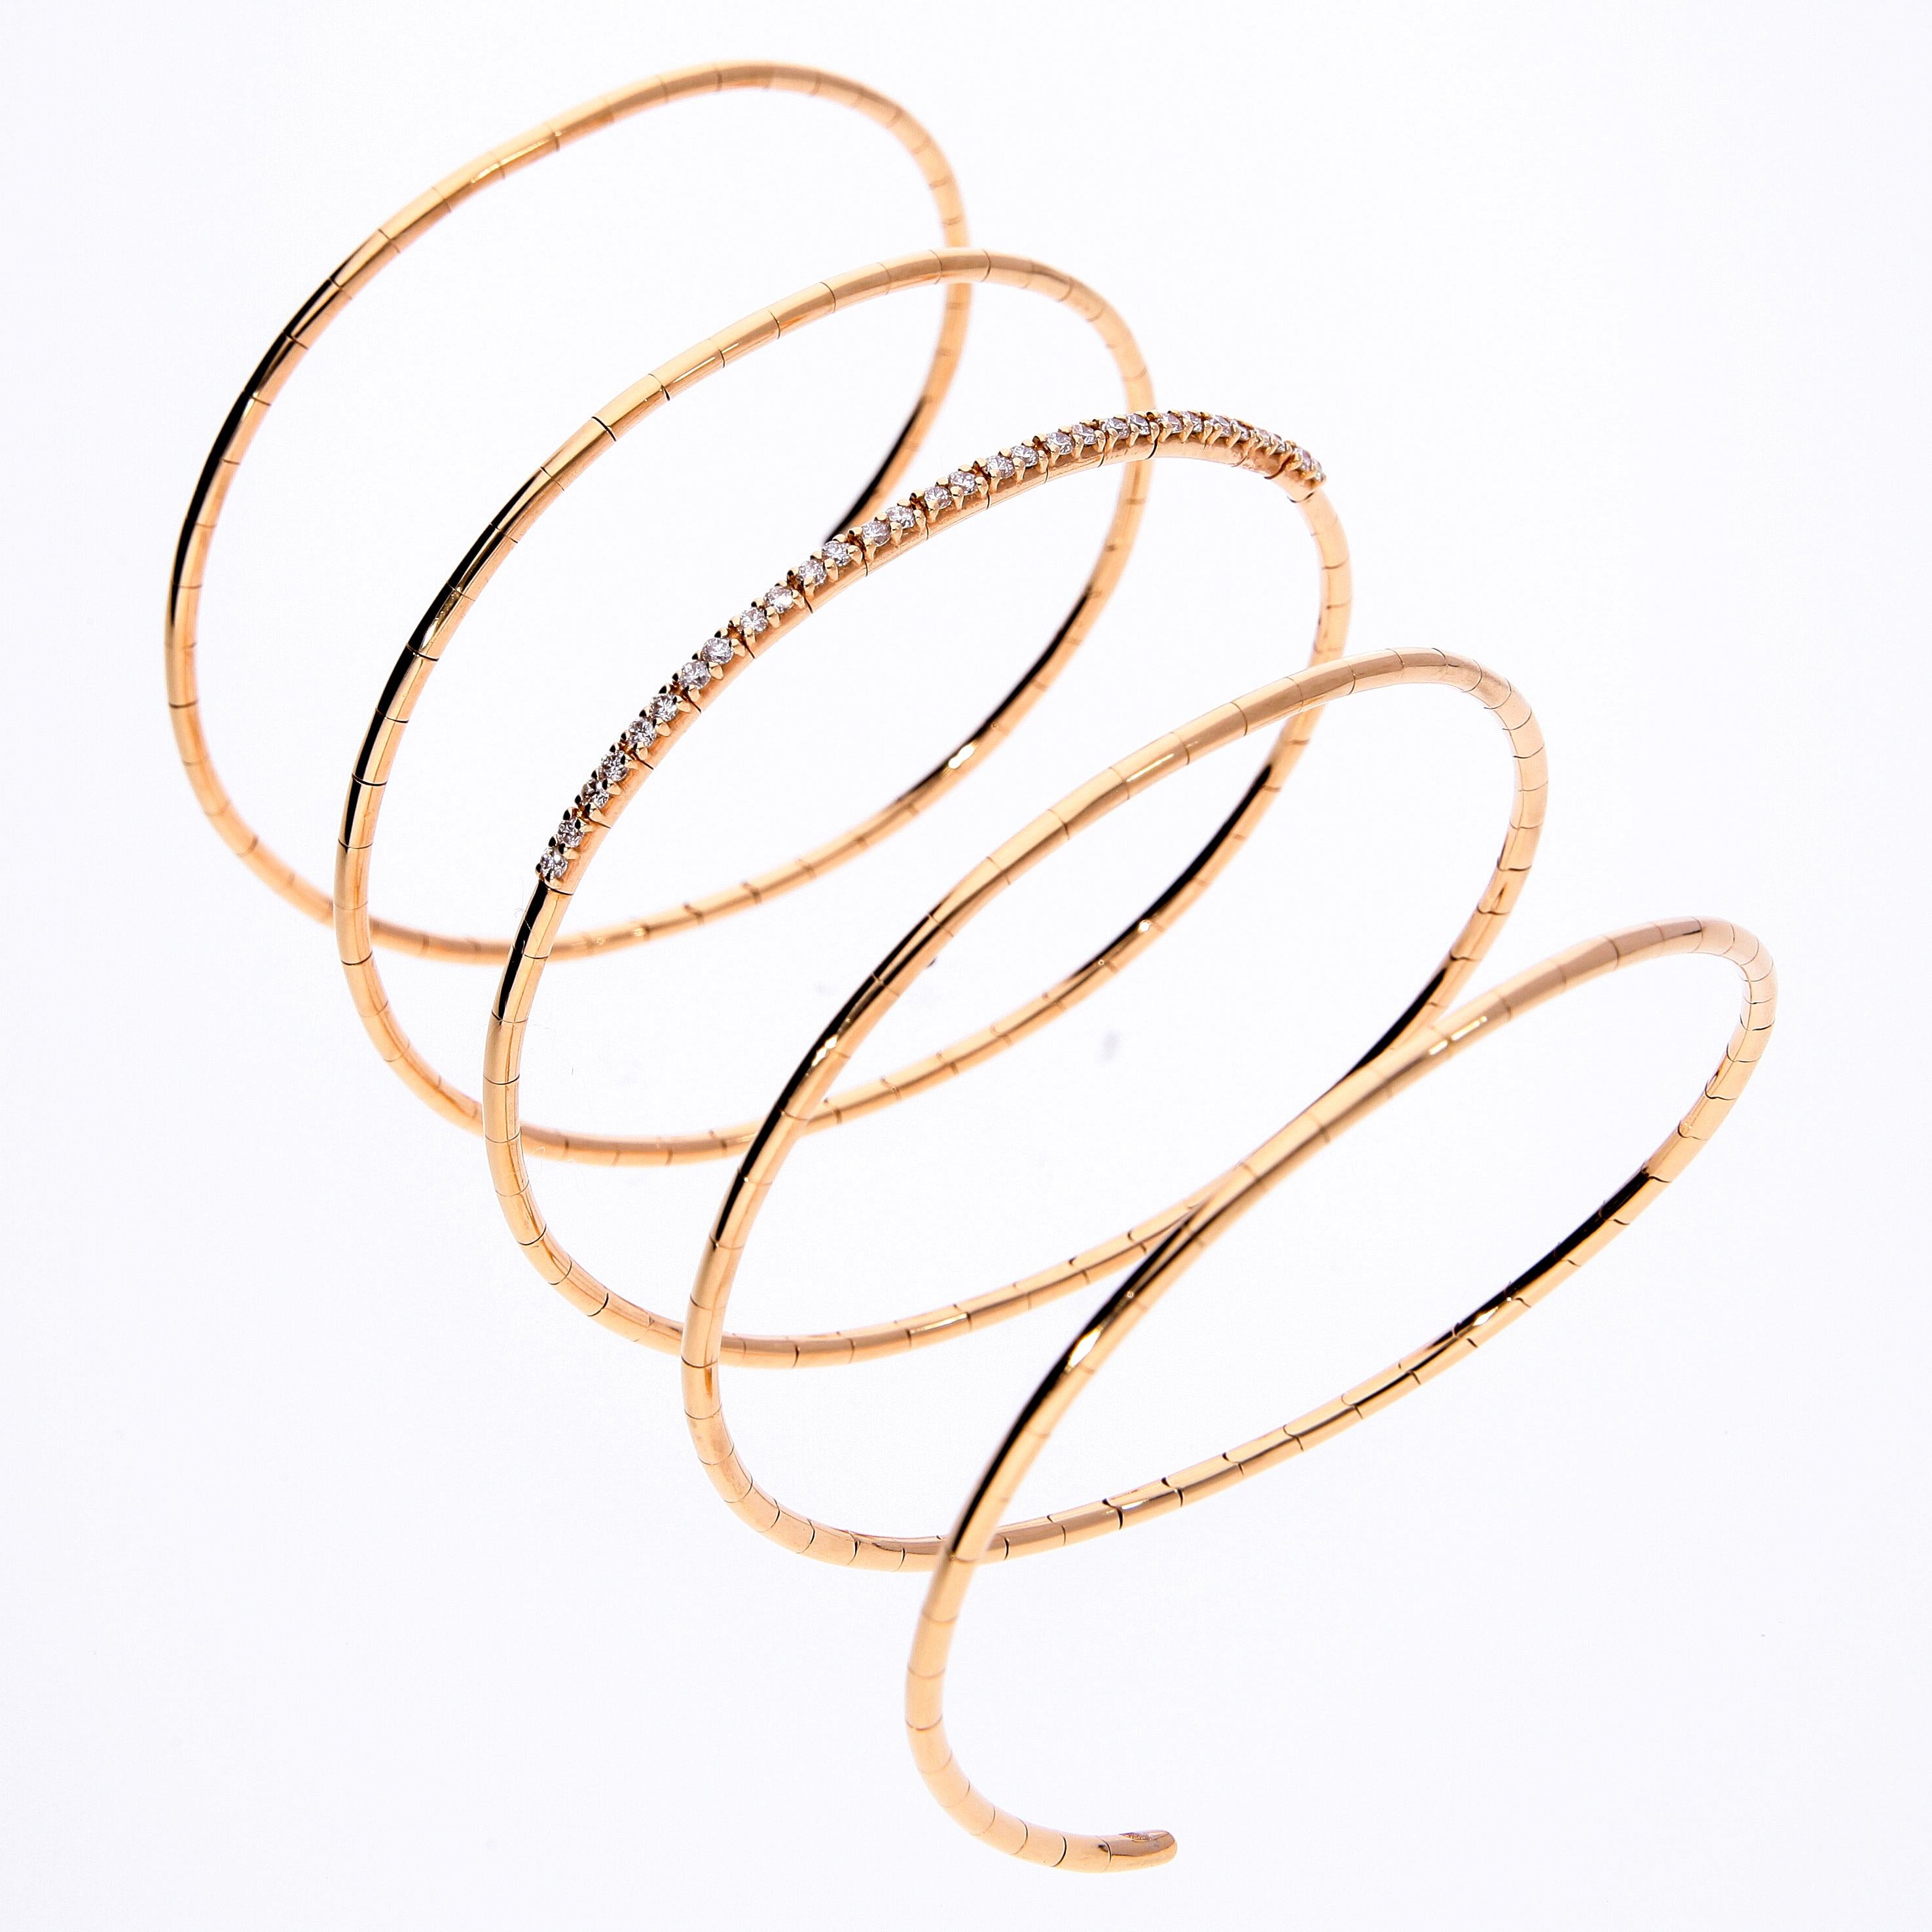 Women's 0.54 ct of Diamonds on 18 Kt Rose Gold Elastic Spiral Bracelet Made in Italy For Sale